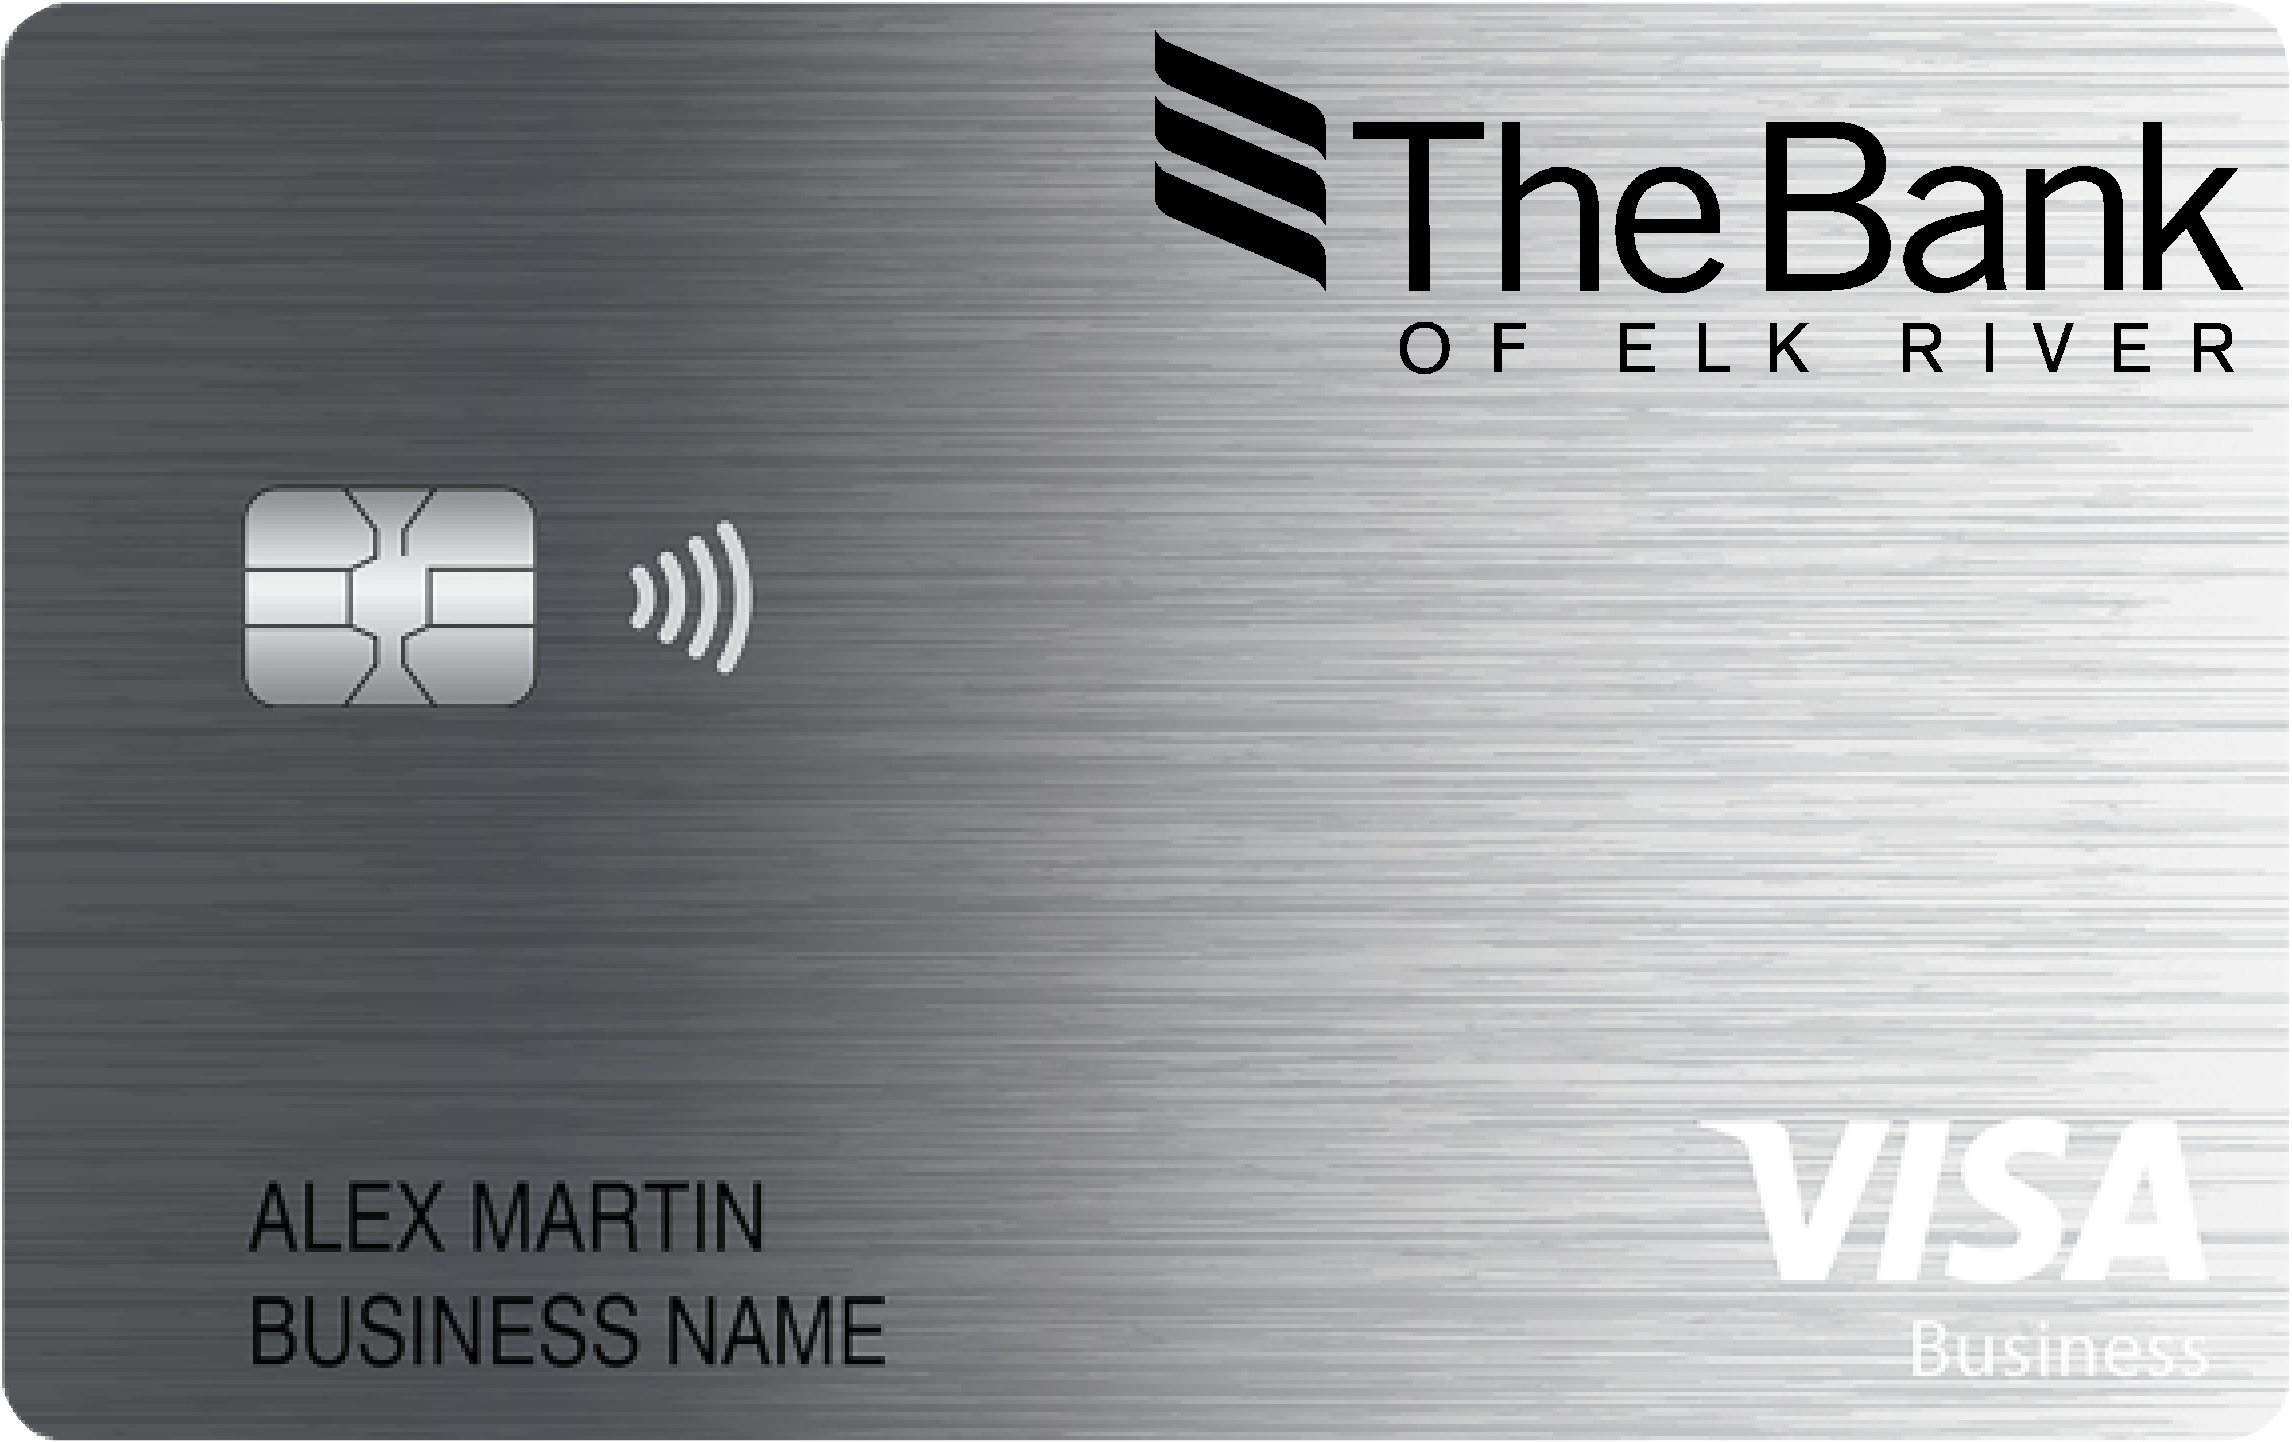 The Bank of Elk River Business Card Card